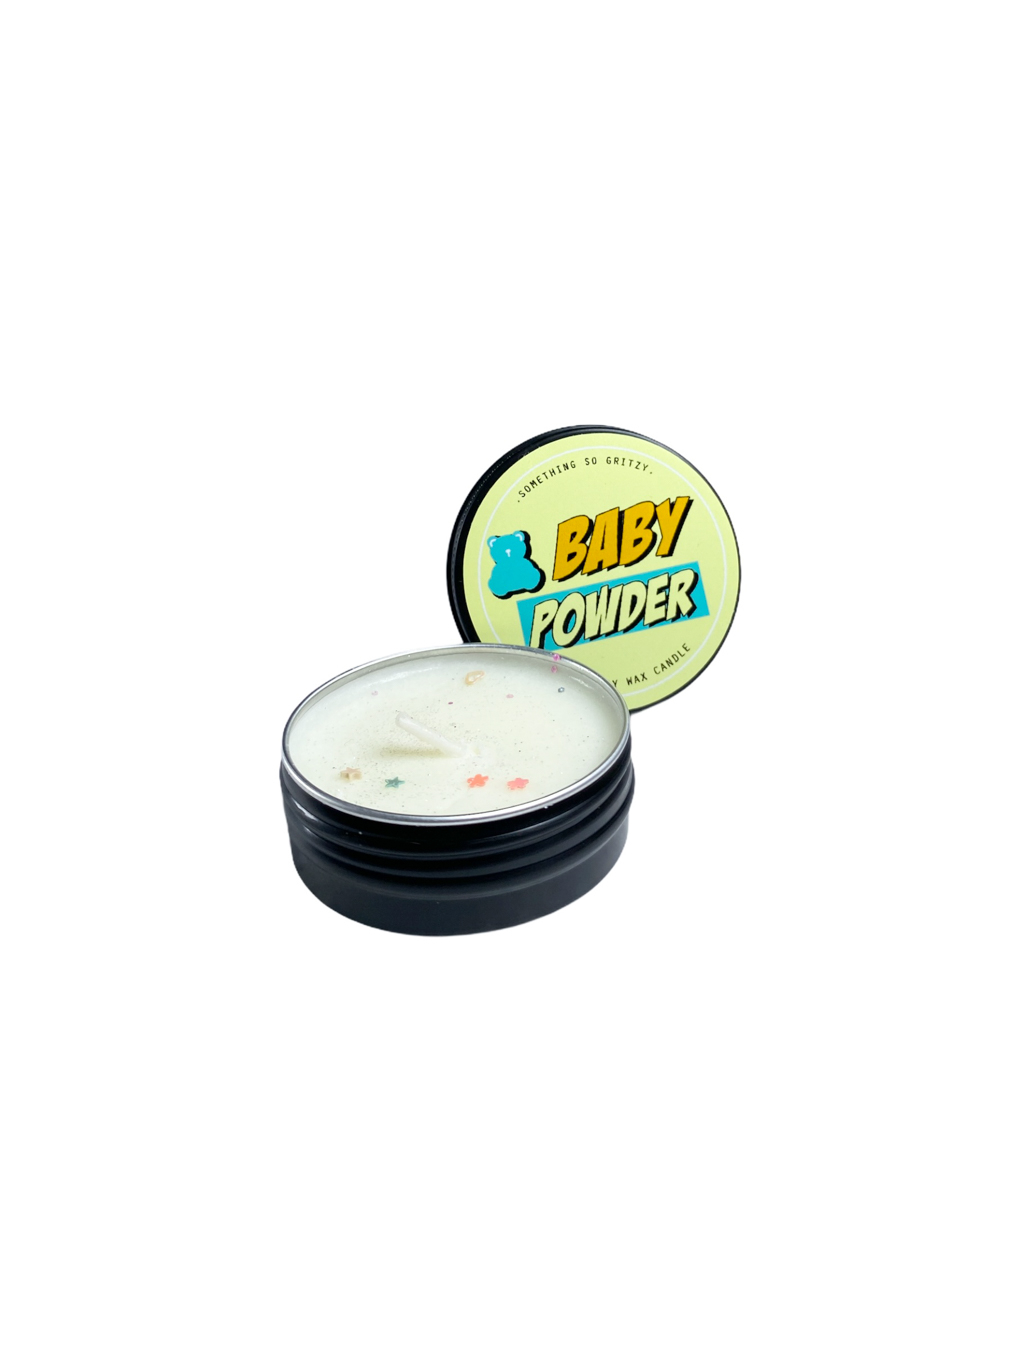 Baby Powder Soy Wax Candle